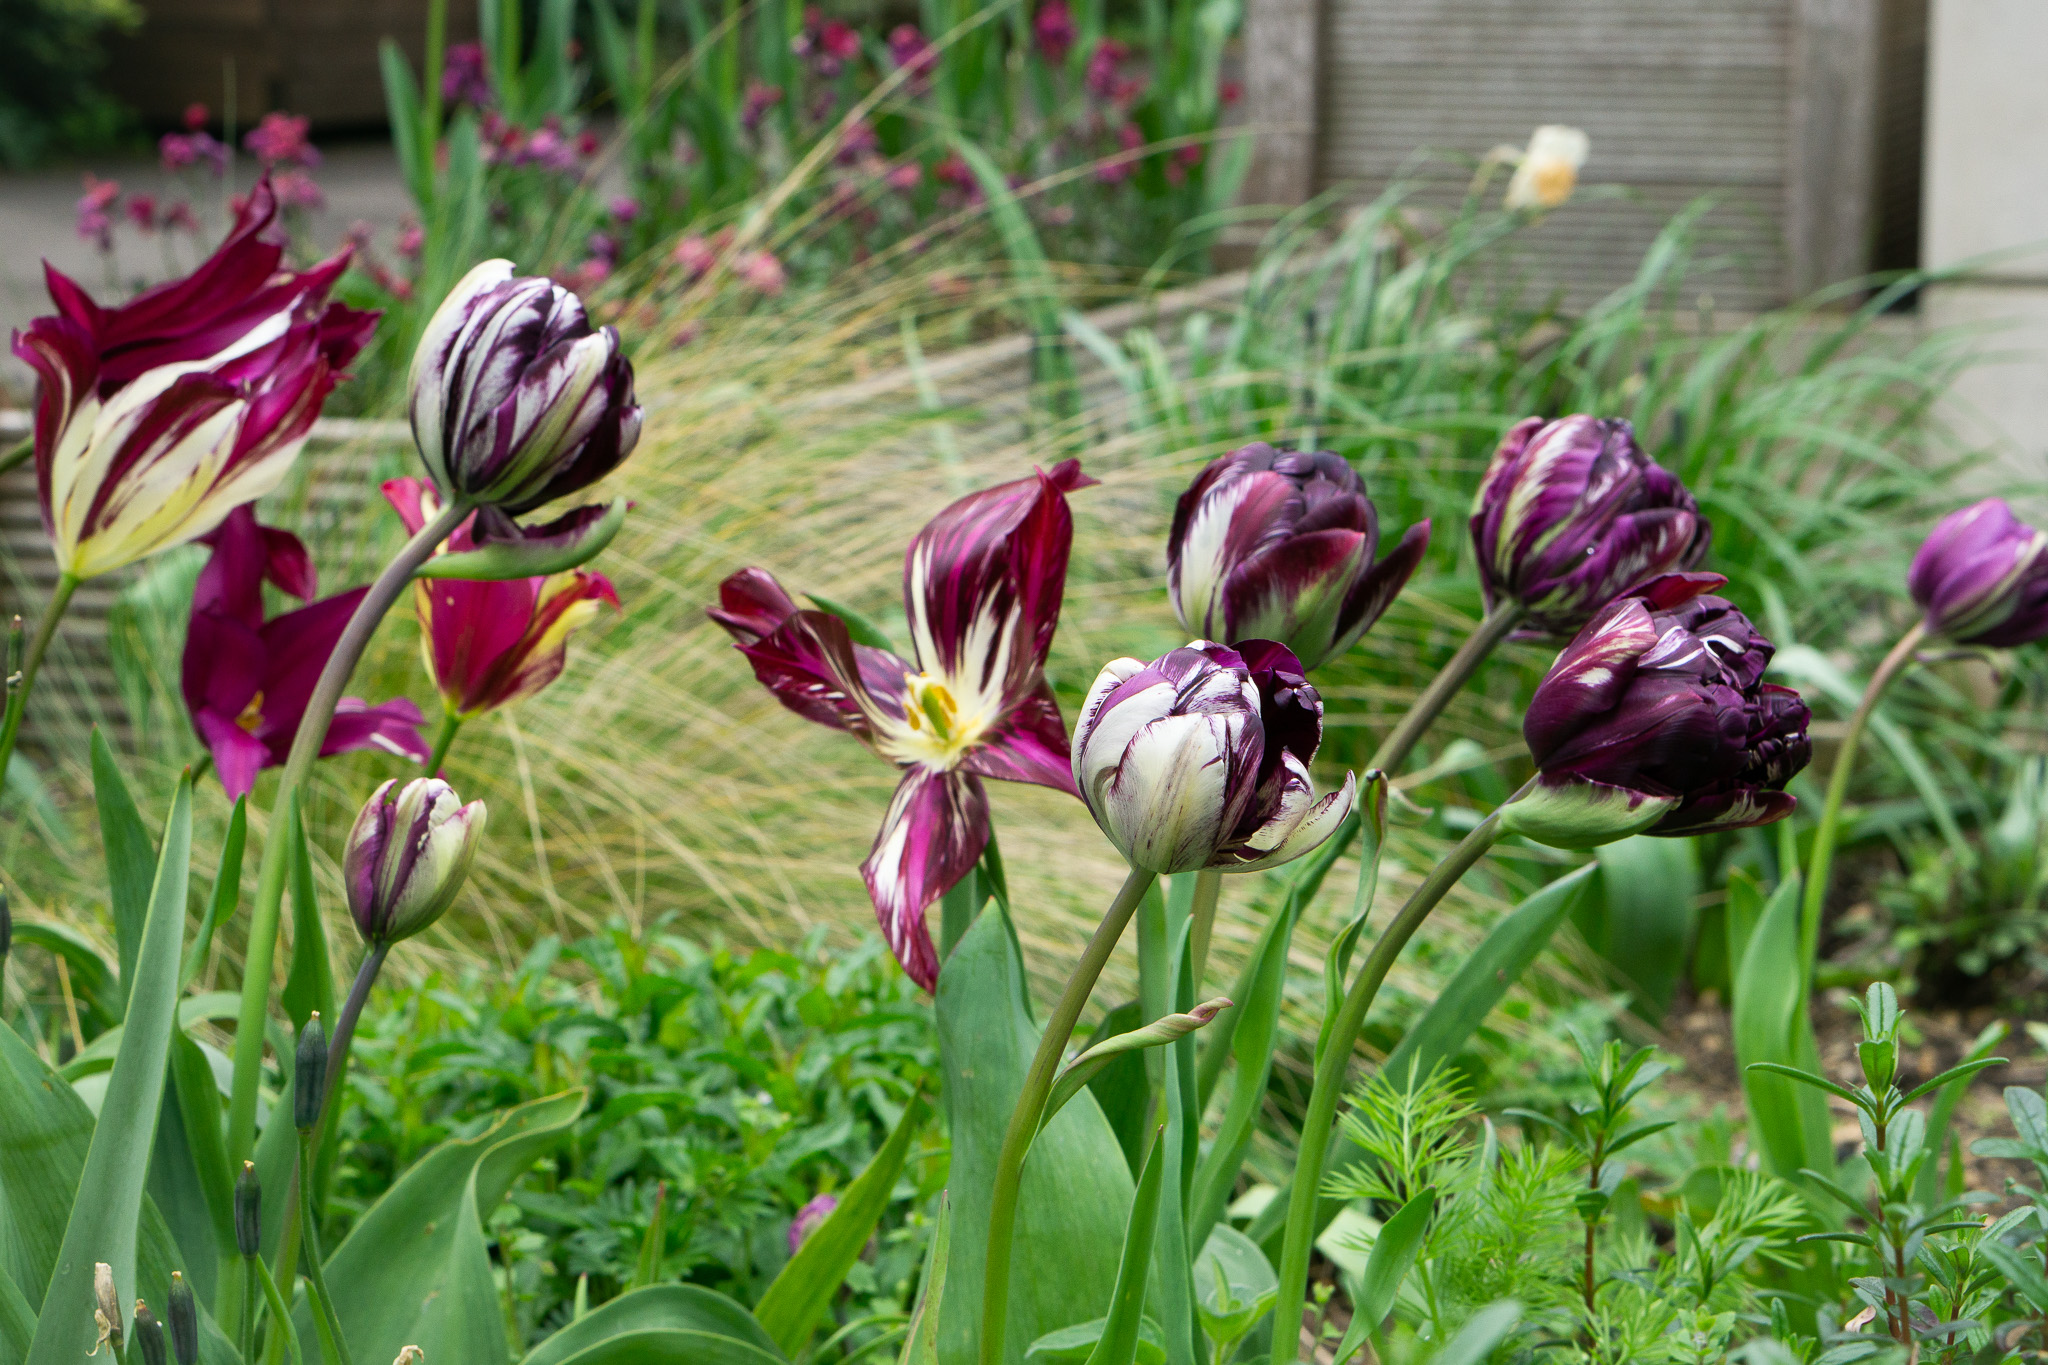 The White streaks of these tulips by the FAH are caused by the Tulip Breaking virus